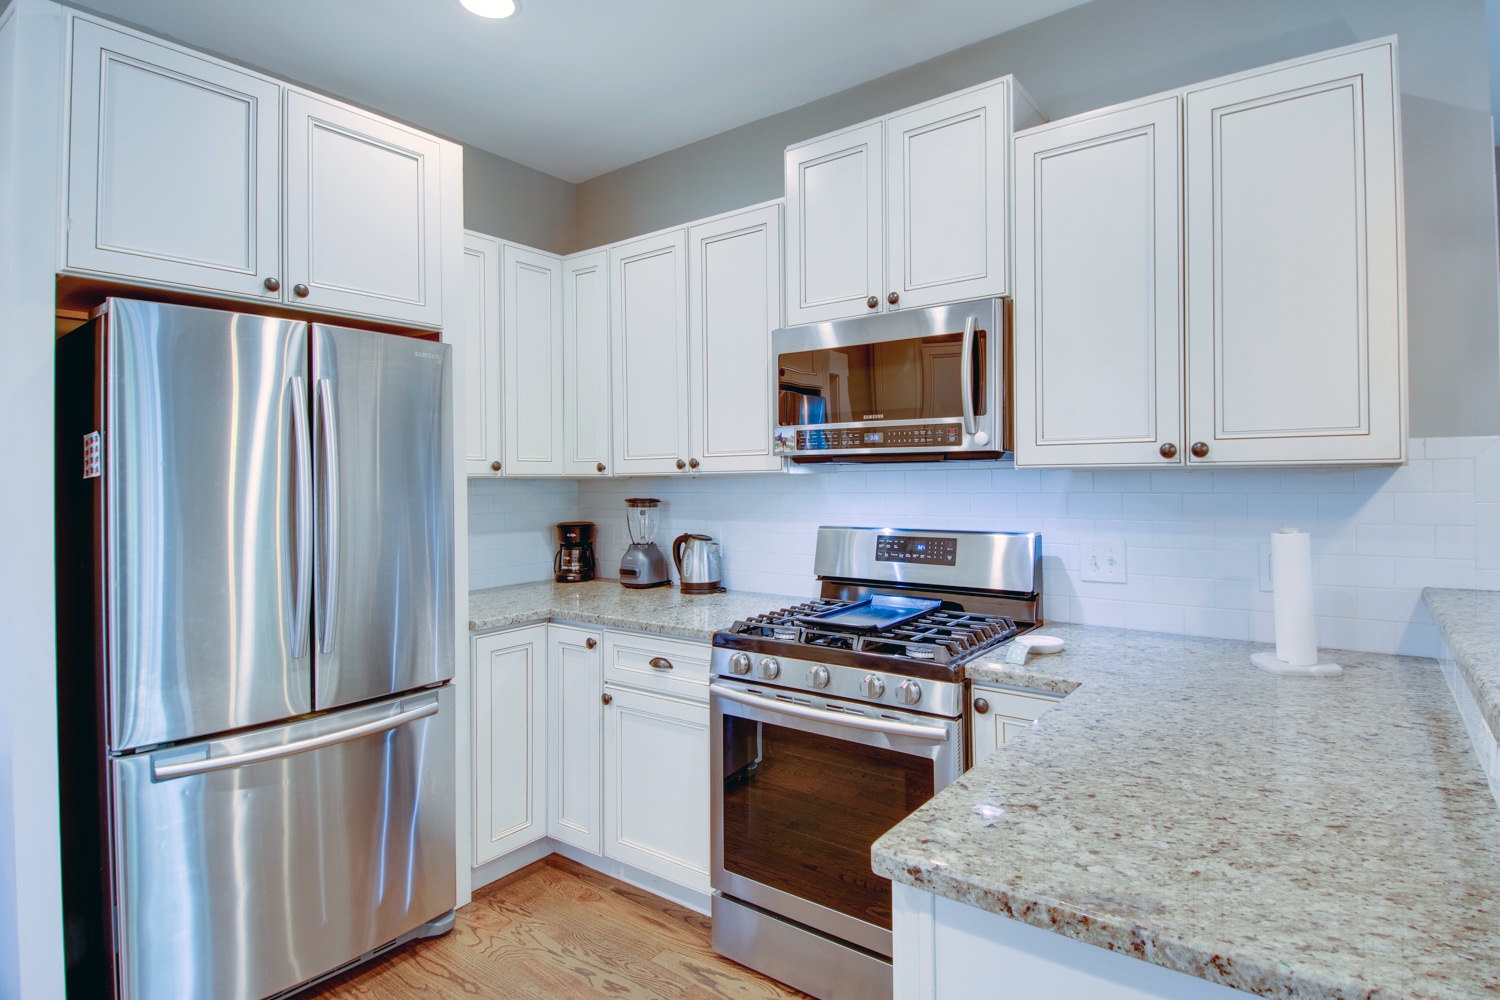 Full kitchen with dishwasher, coffee maker, and more